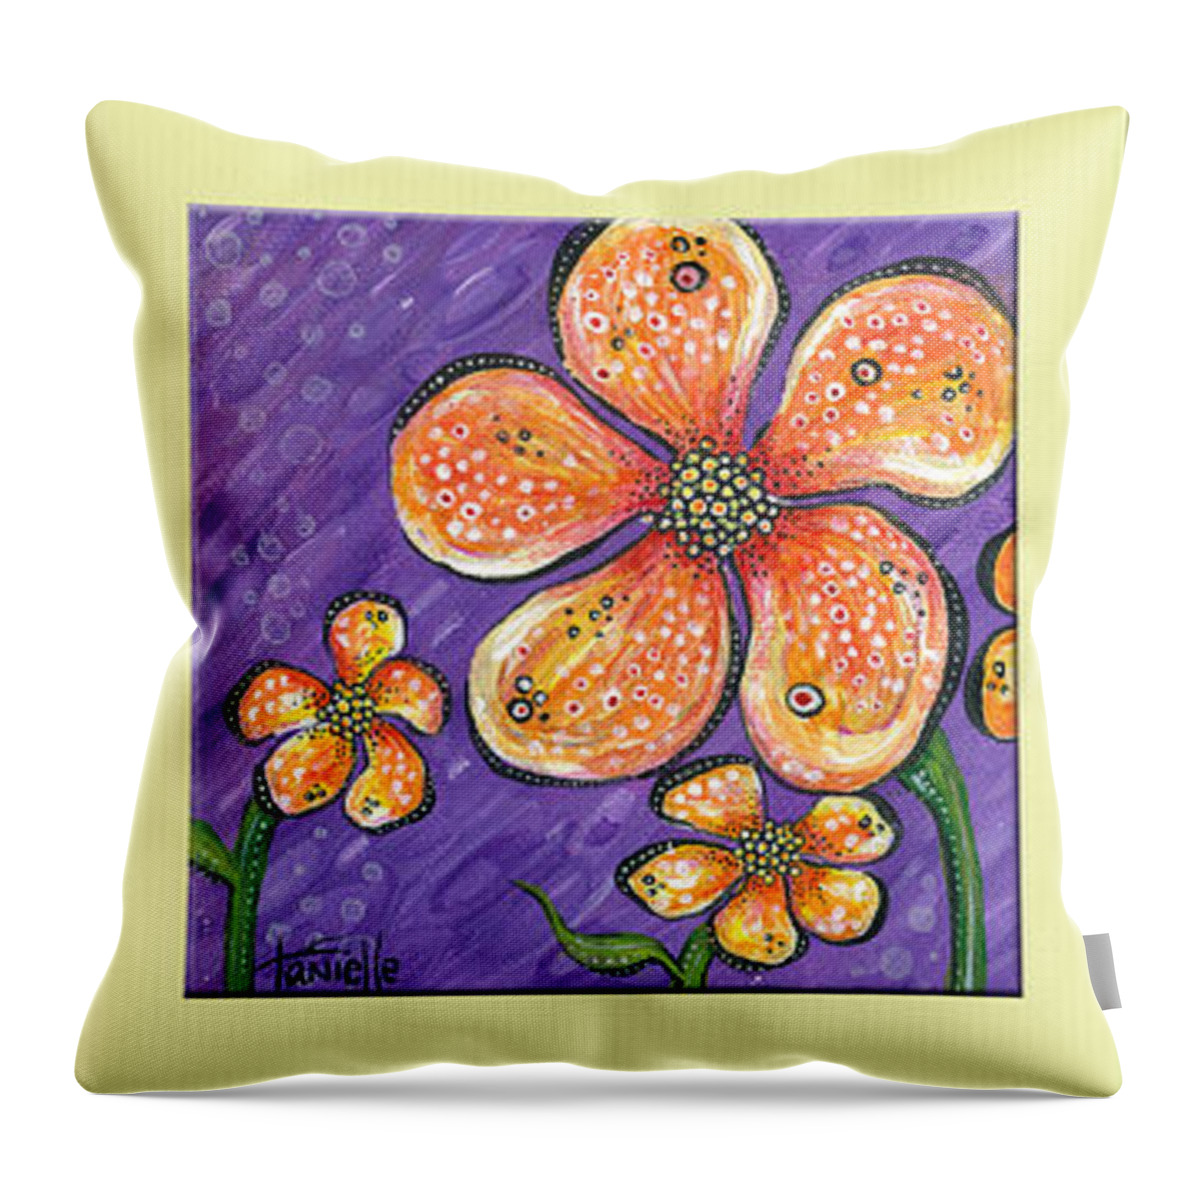 Floral Throw Pillow featuring the painting Flower Power by Tanielle Childers